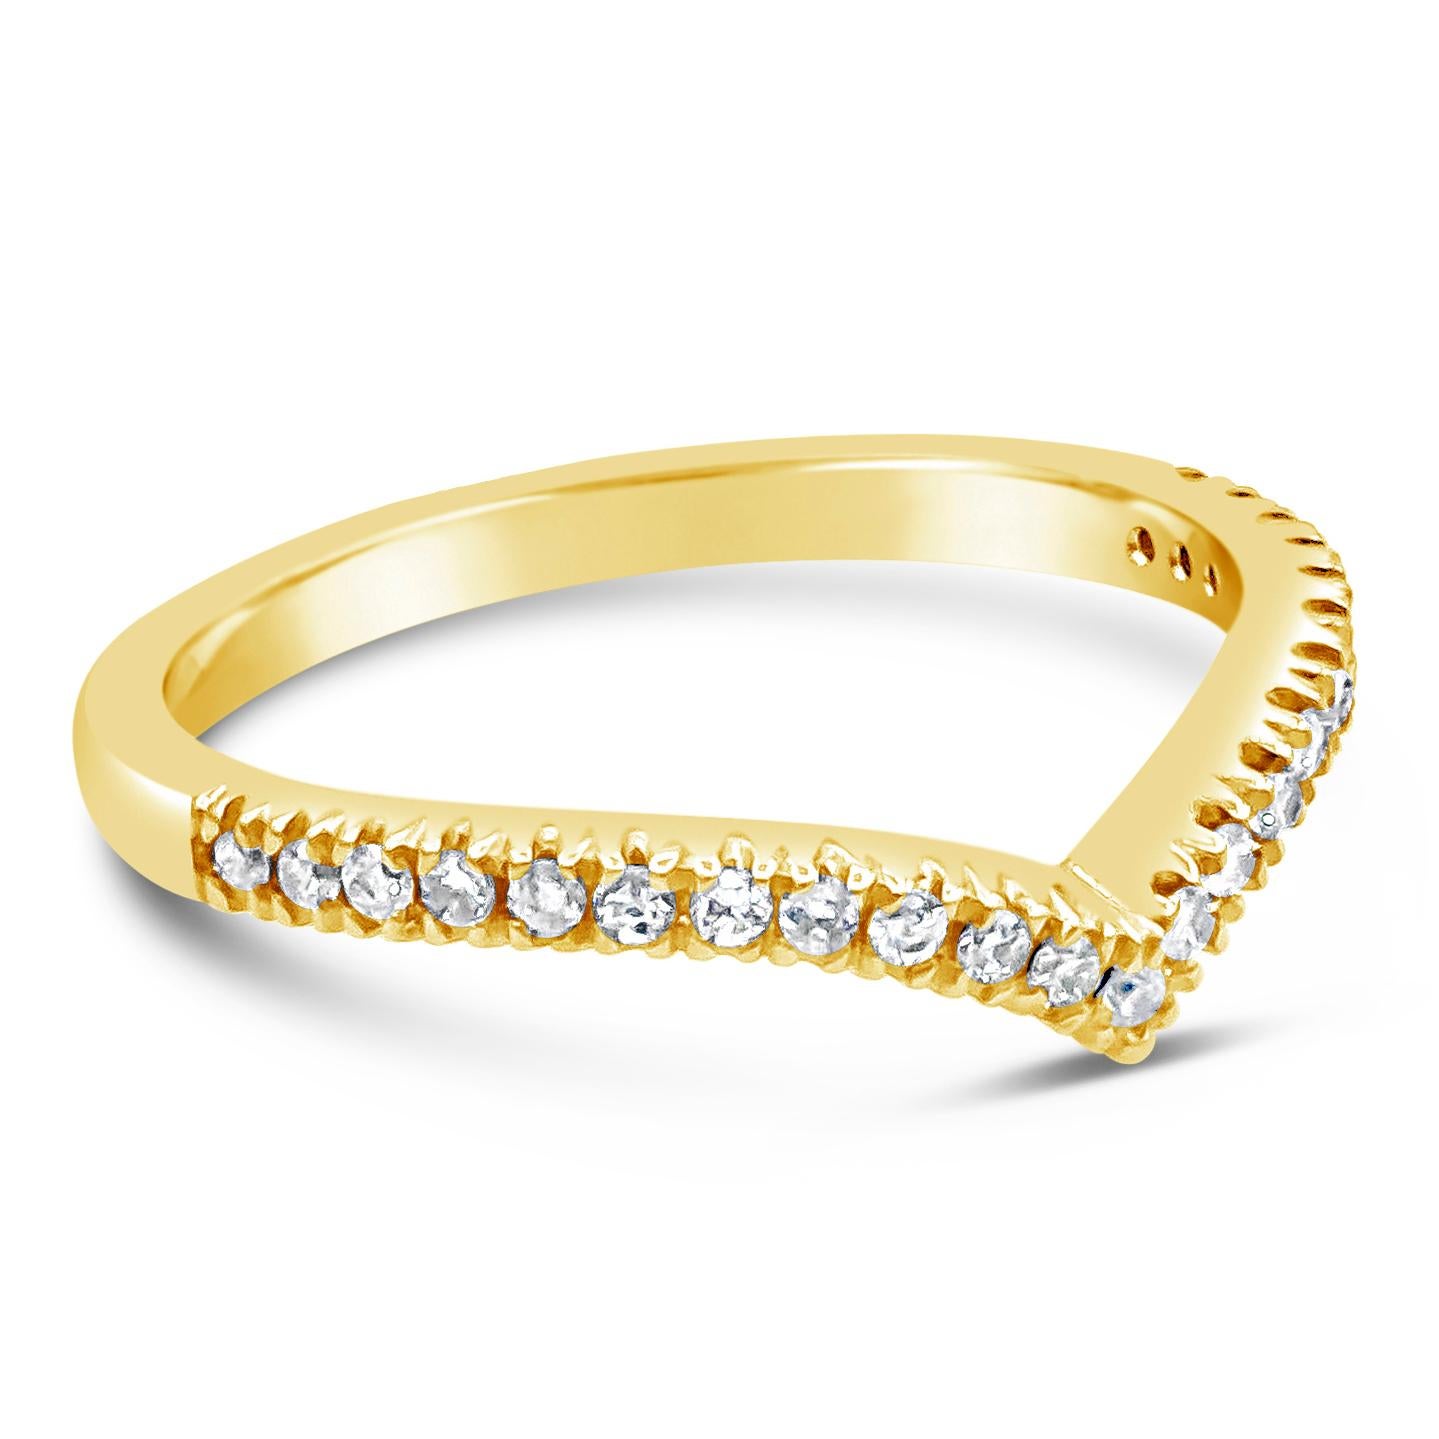 A modern wedding band style that can stack with an engagement ring. Set with 0.22 carats total of round brilliant diamonds along a V-shaped mounting. Made with 18K Yellow Gold Size 6.75 US and resizable upon request.

Roman Malakov is a custom